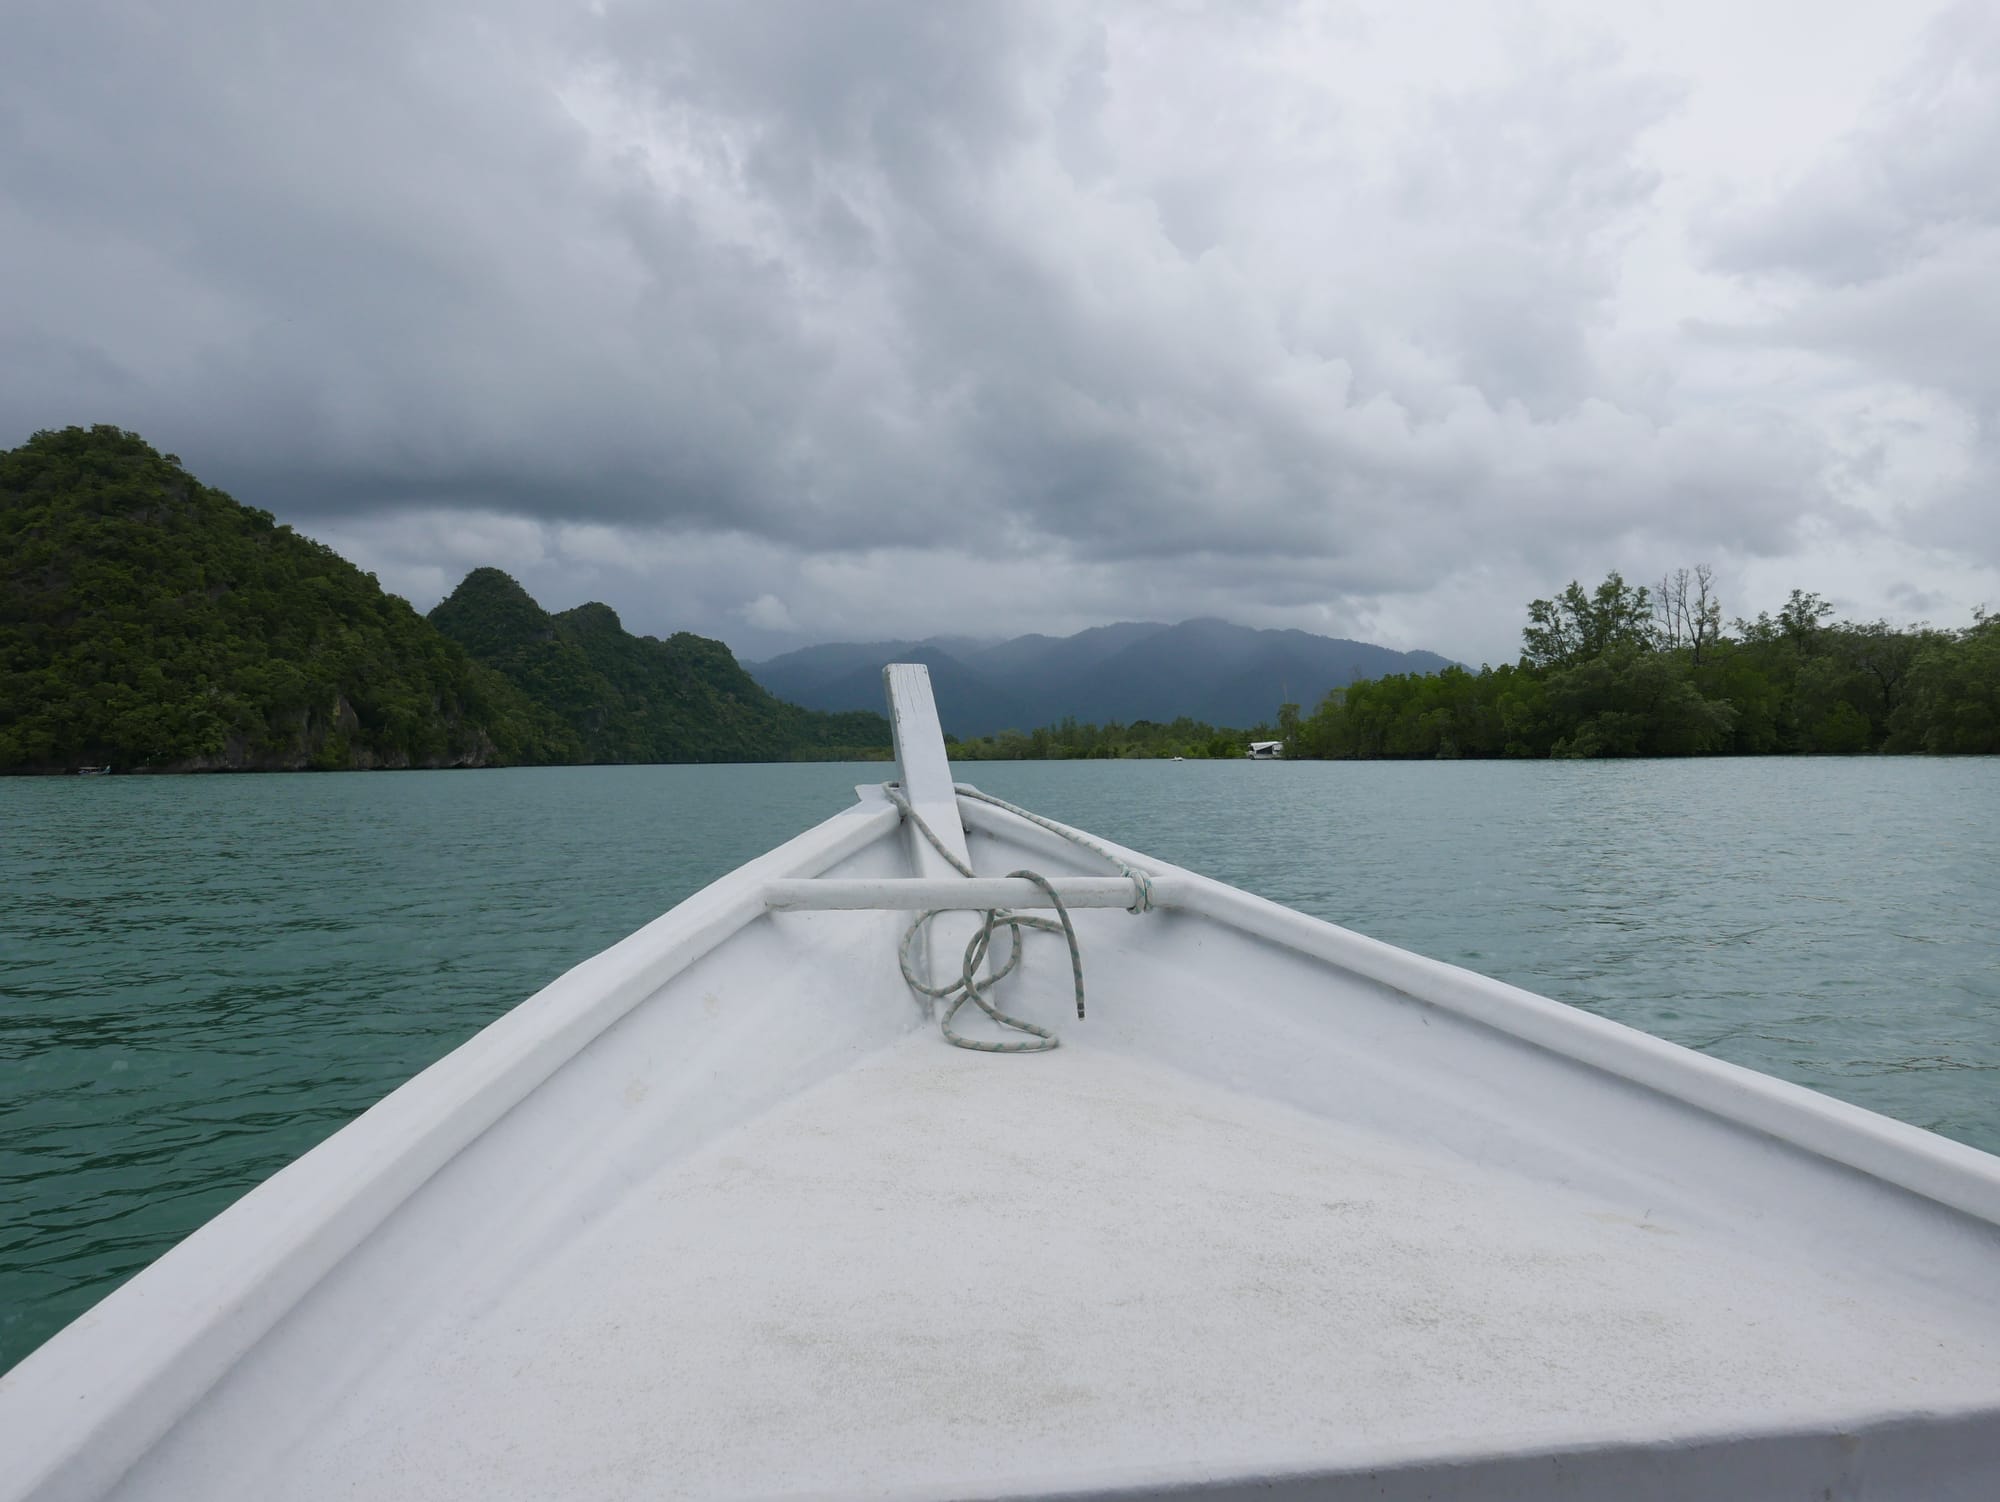 Photo by Author — on the boat to the swamp — Tg Rhu Mangrove Tour, Langkawi, Malaysia